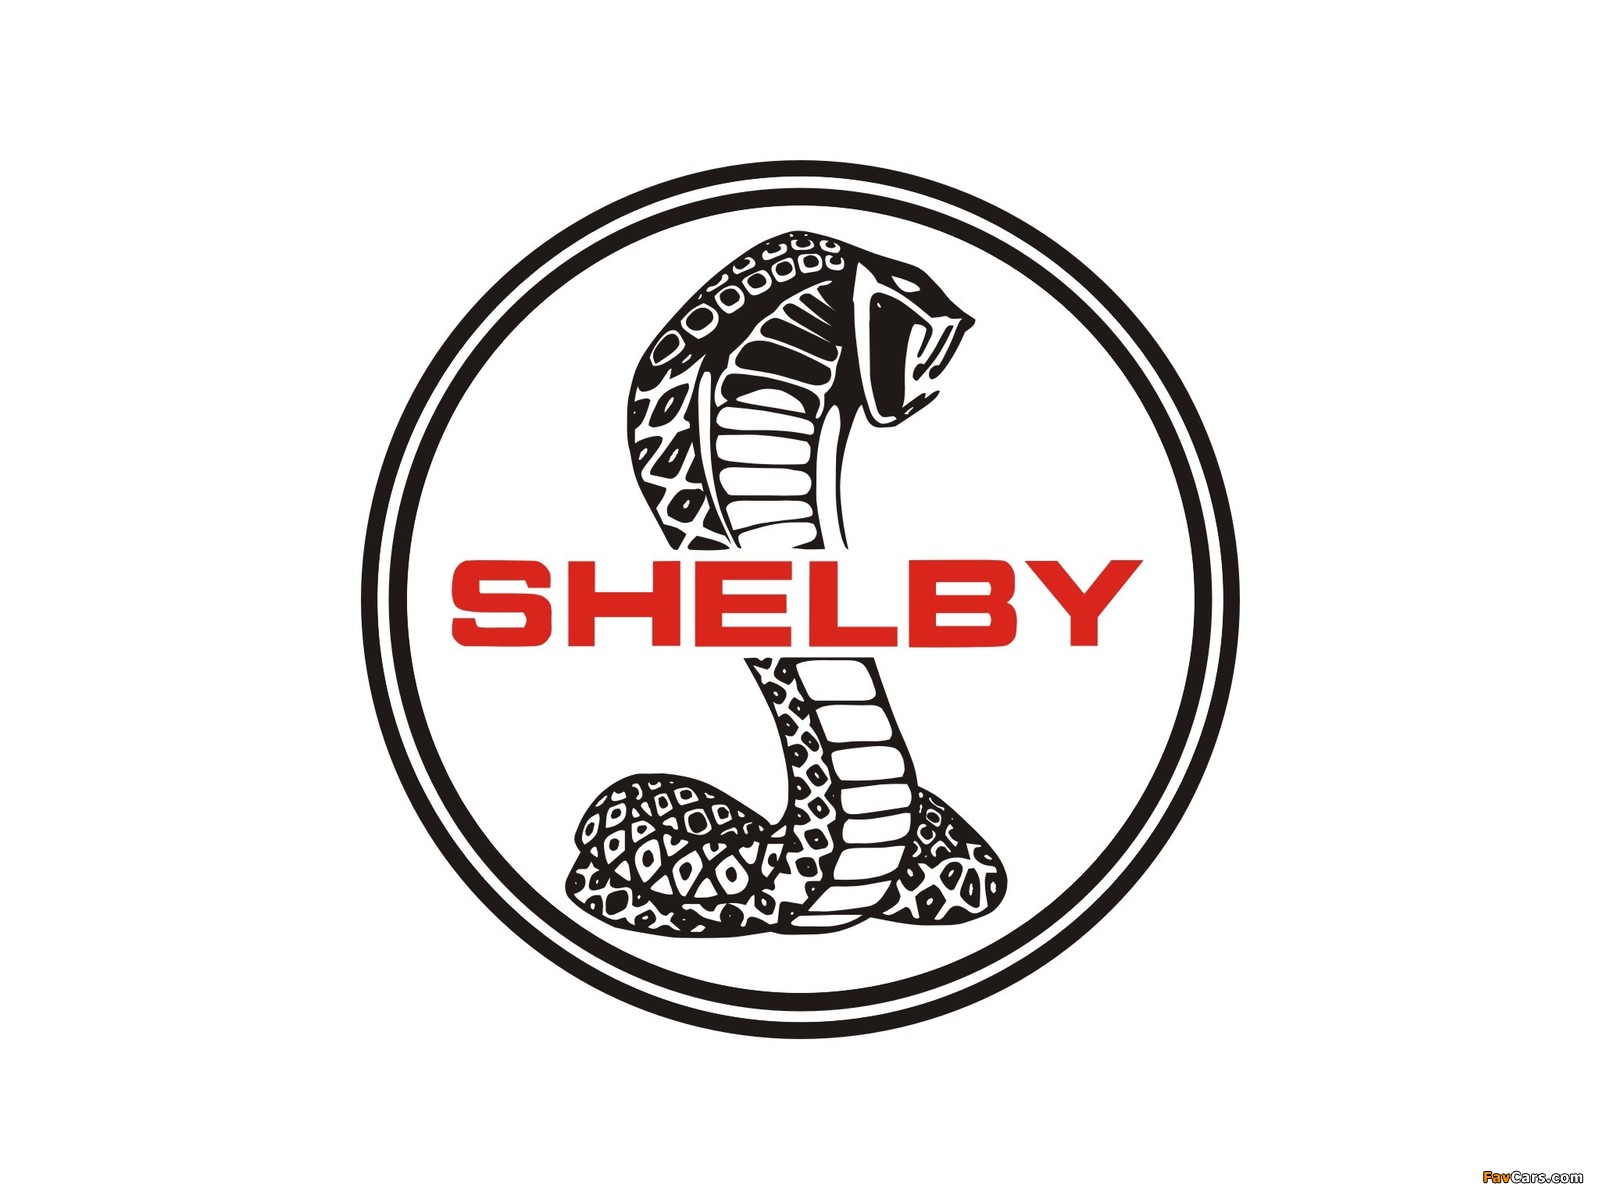 Shelby wallpapers (1600 x 1200)